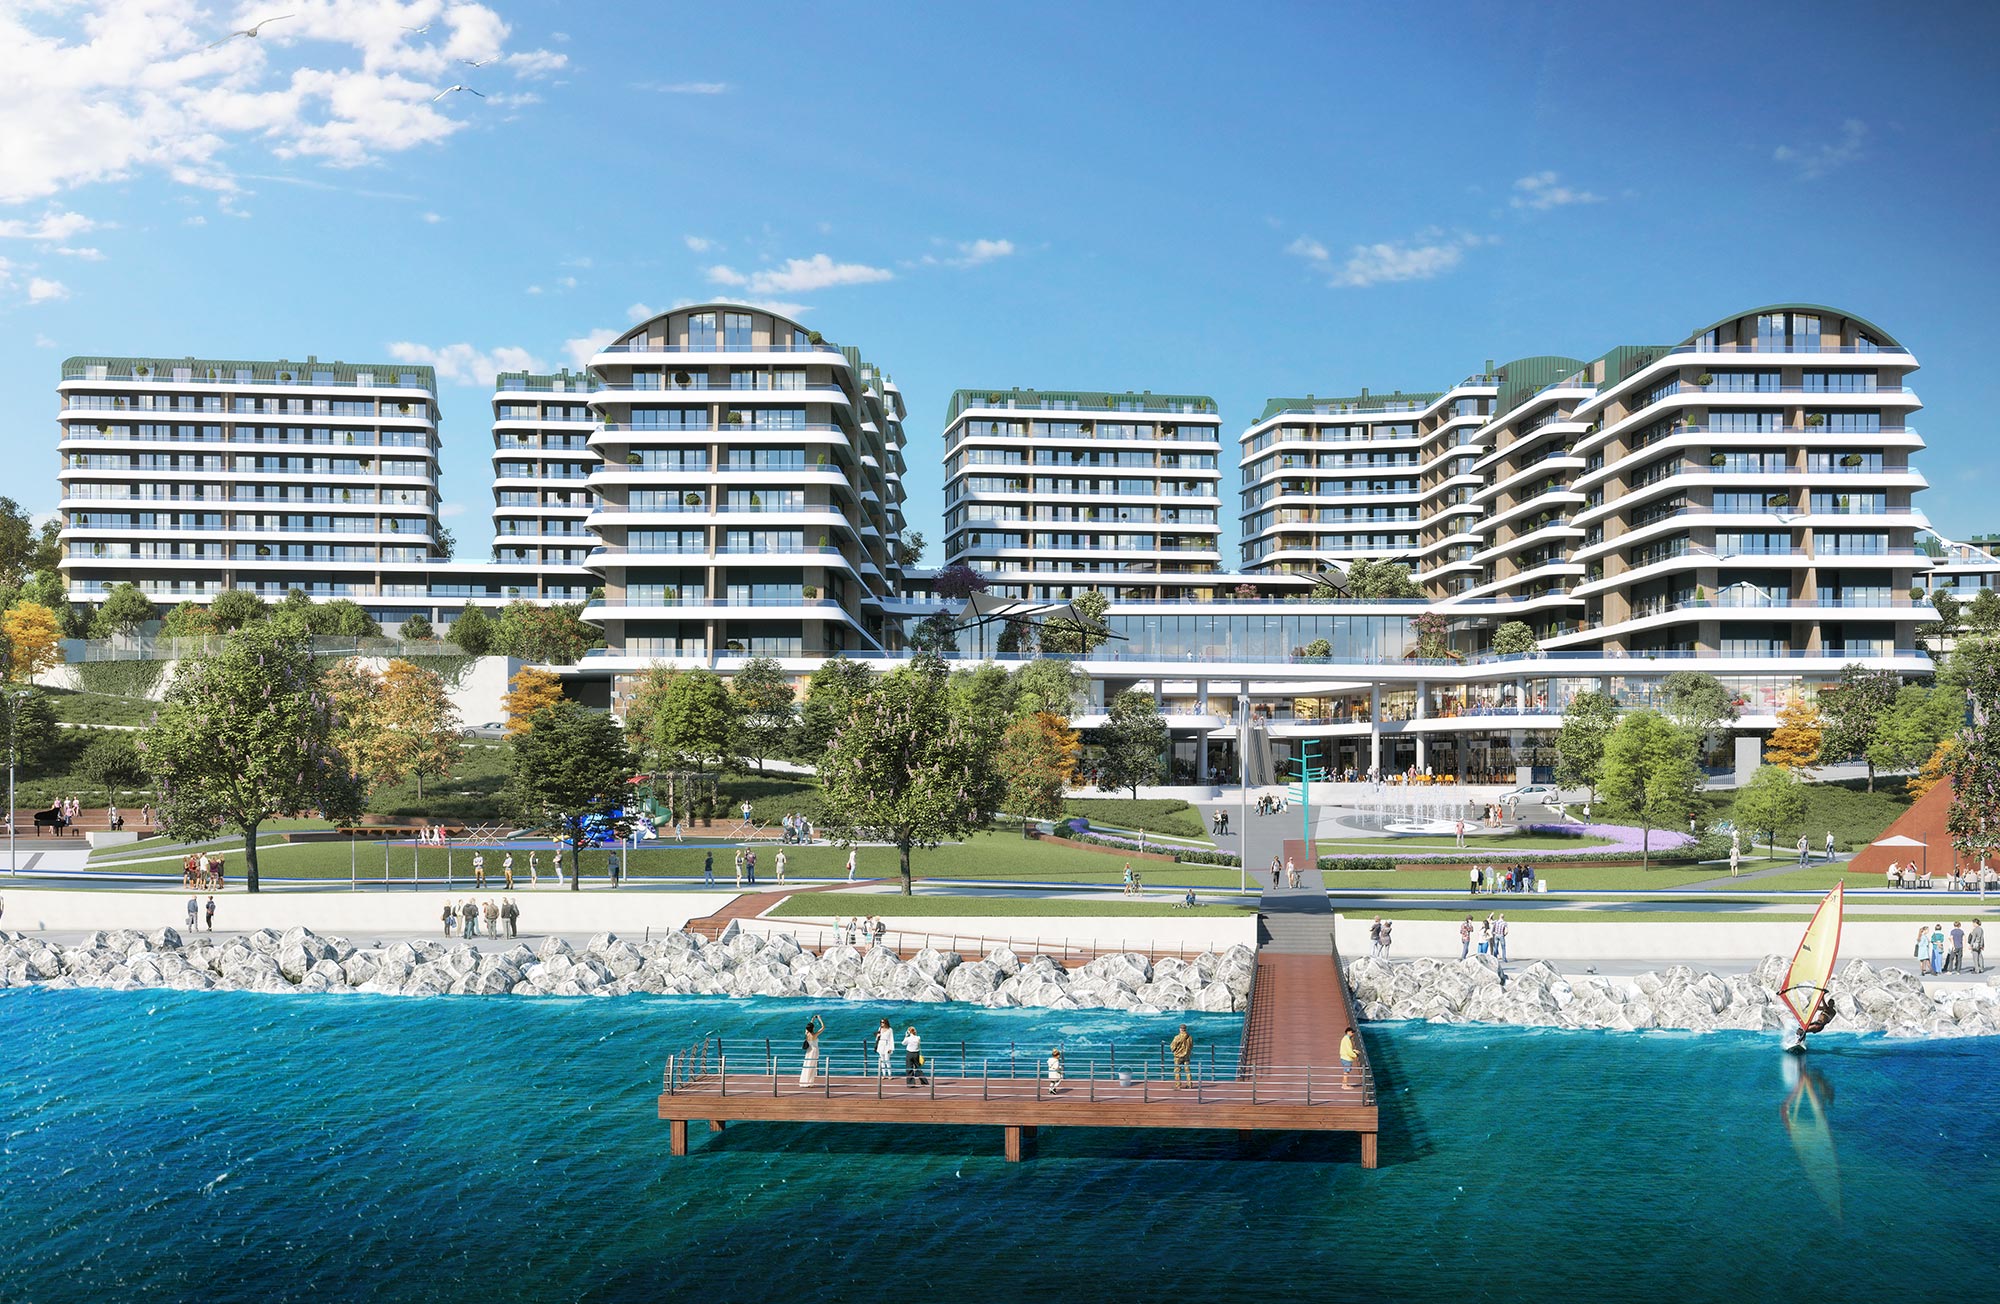 Sea-View Apartments for Sale, Now You Can Extend Your Hand and Feel The Warmth of The Sea